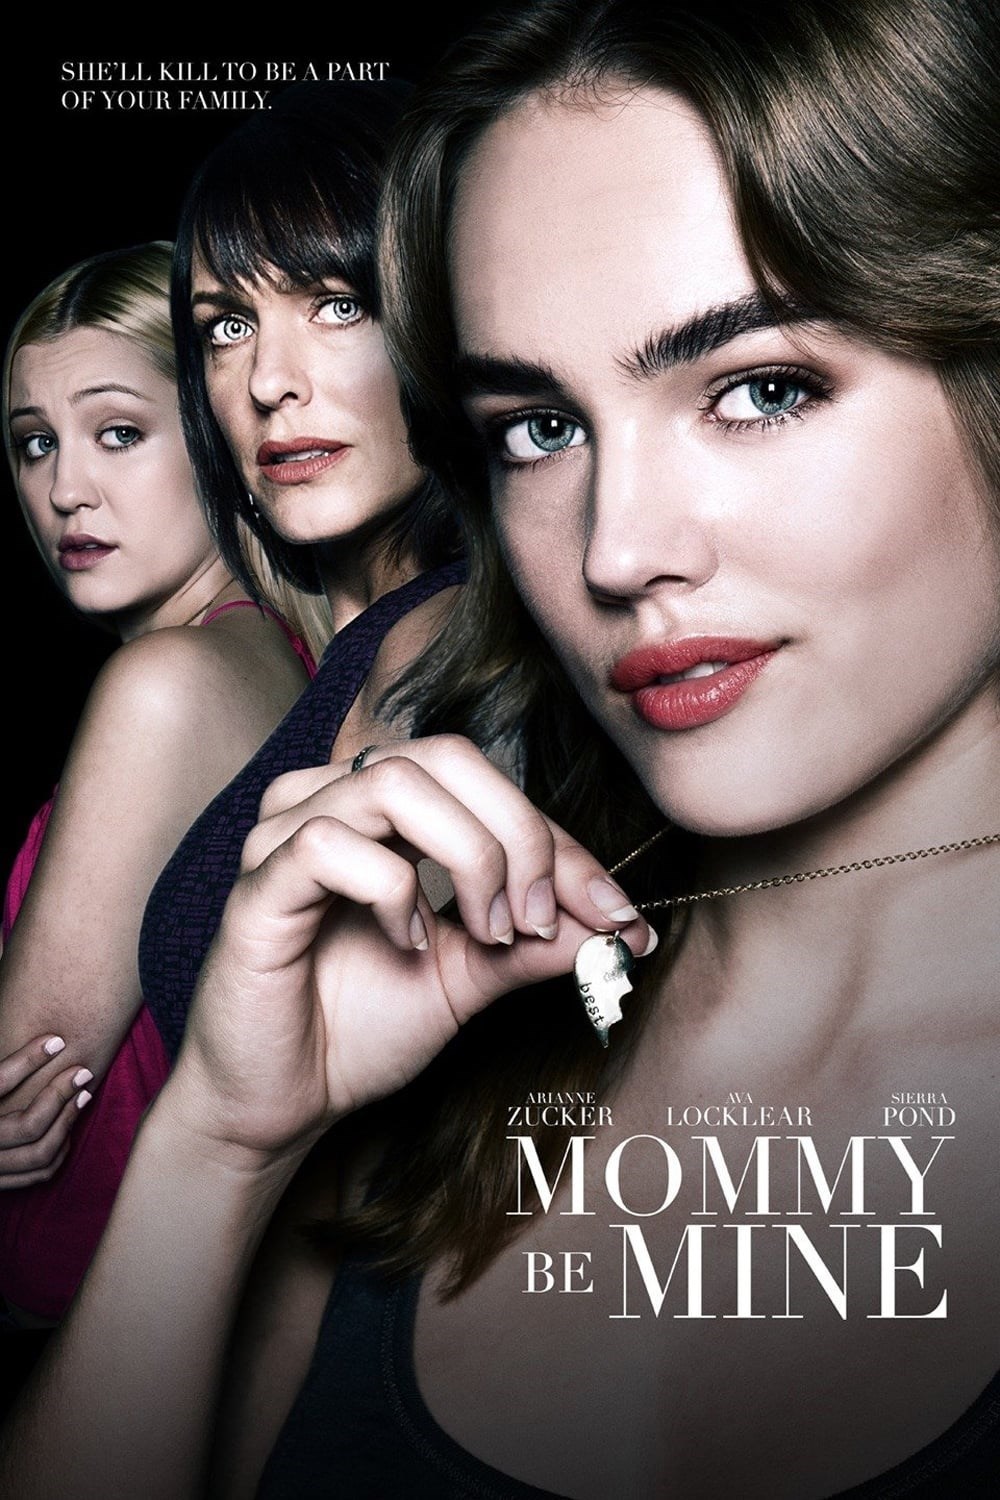 Mommy movies